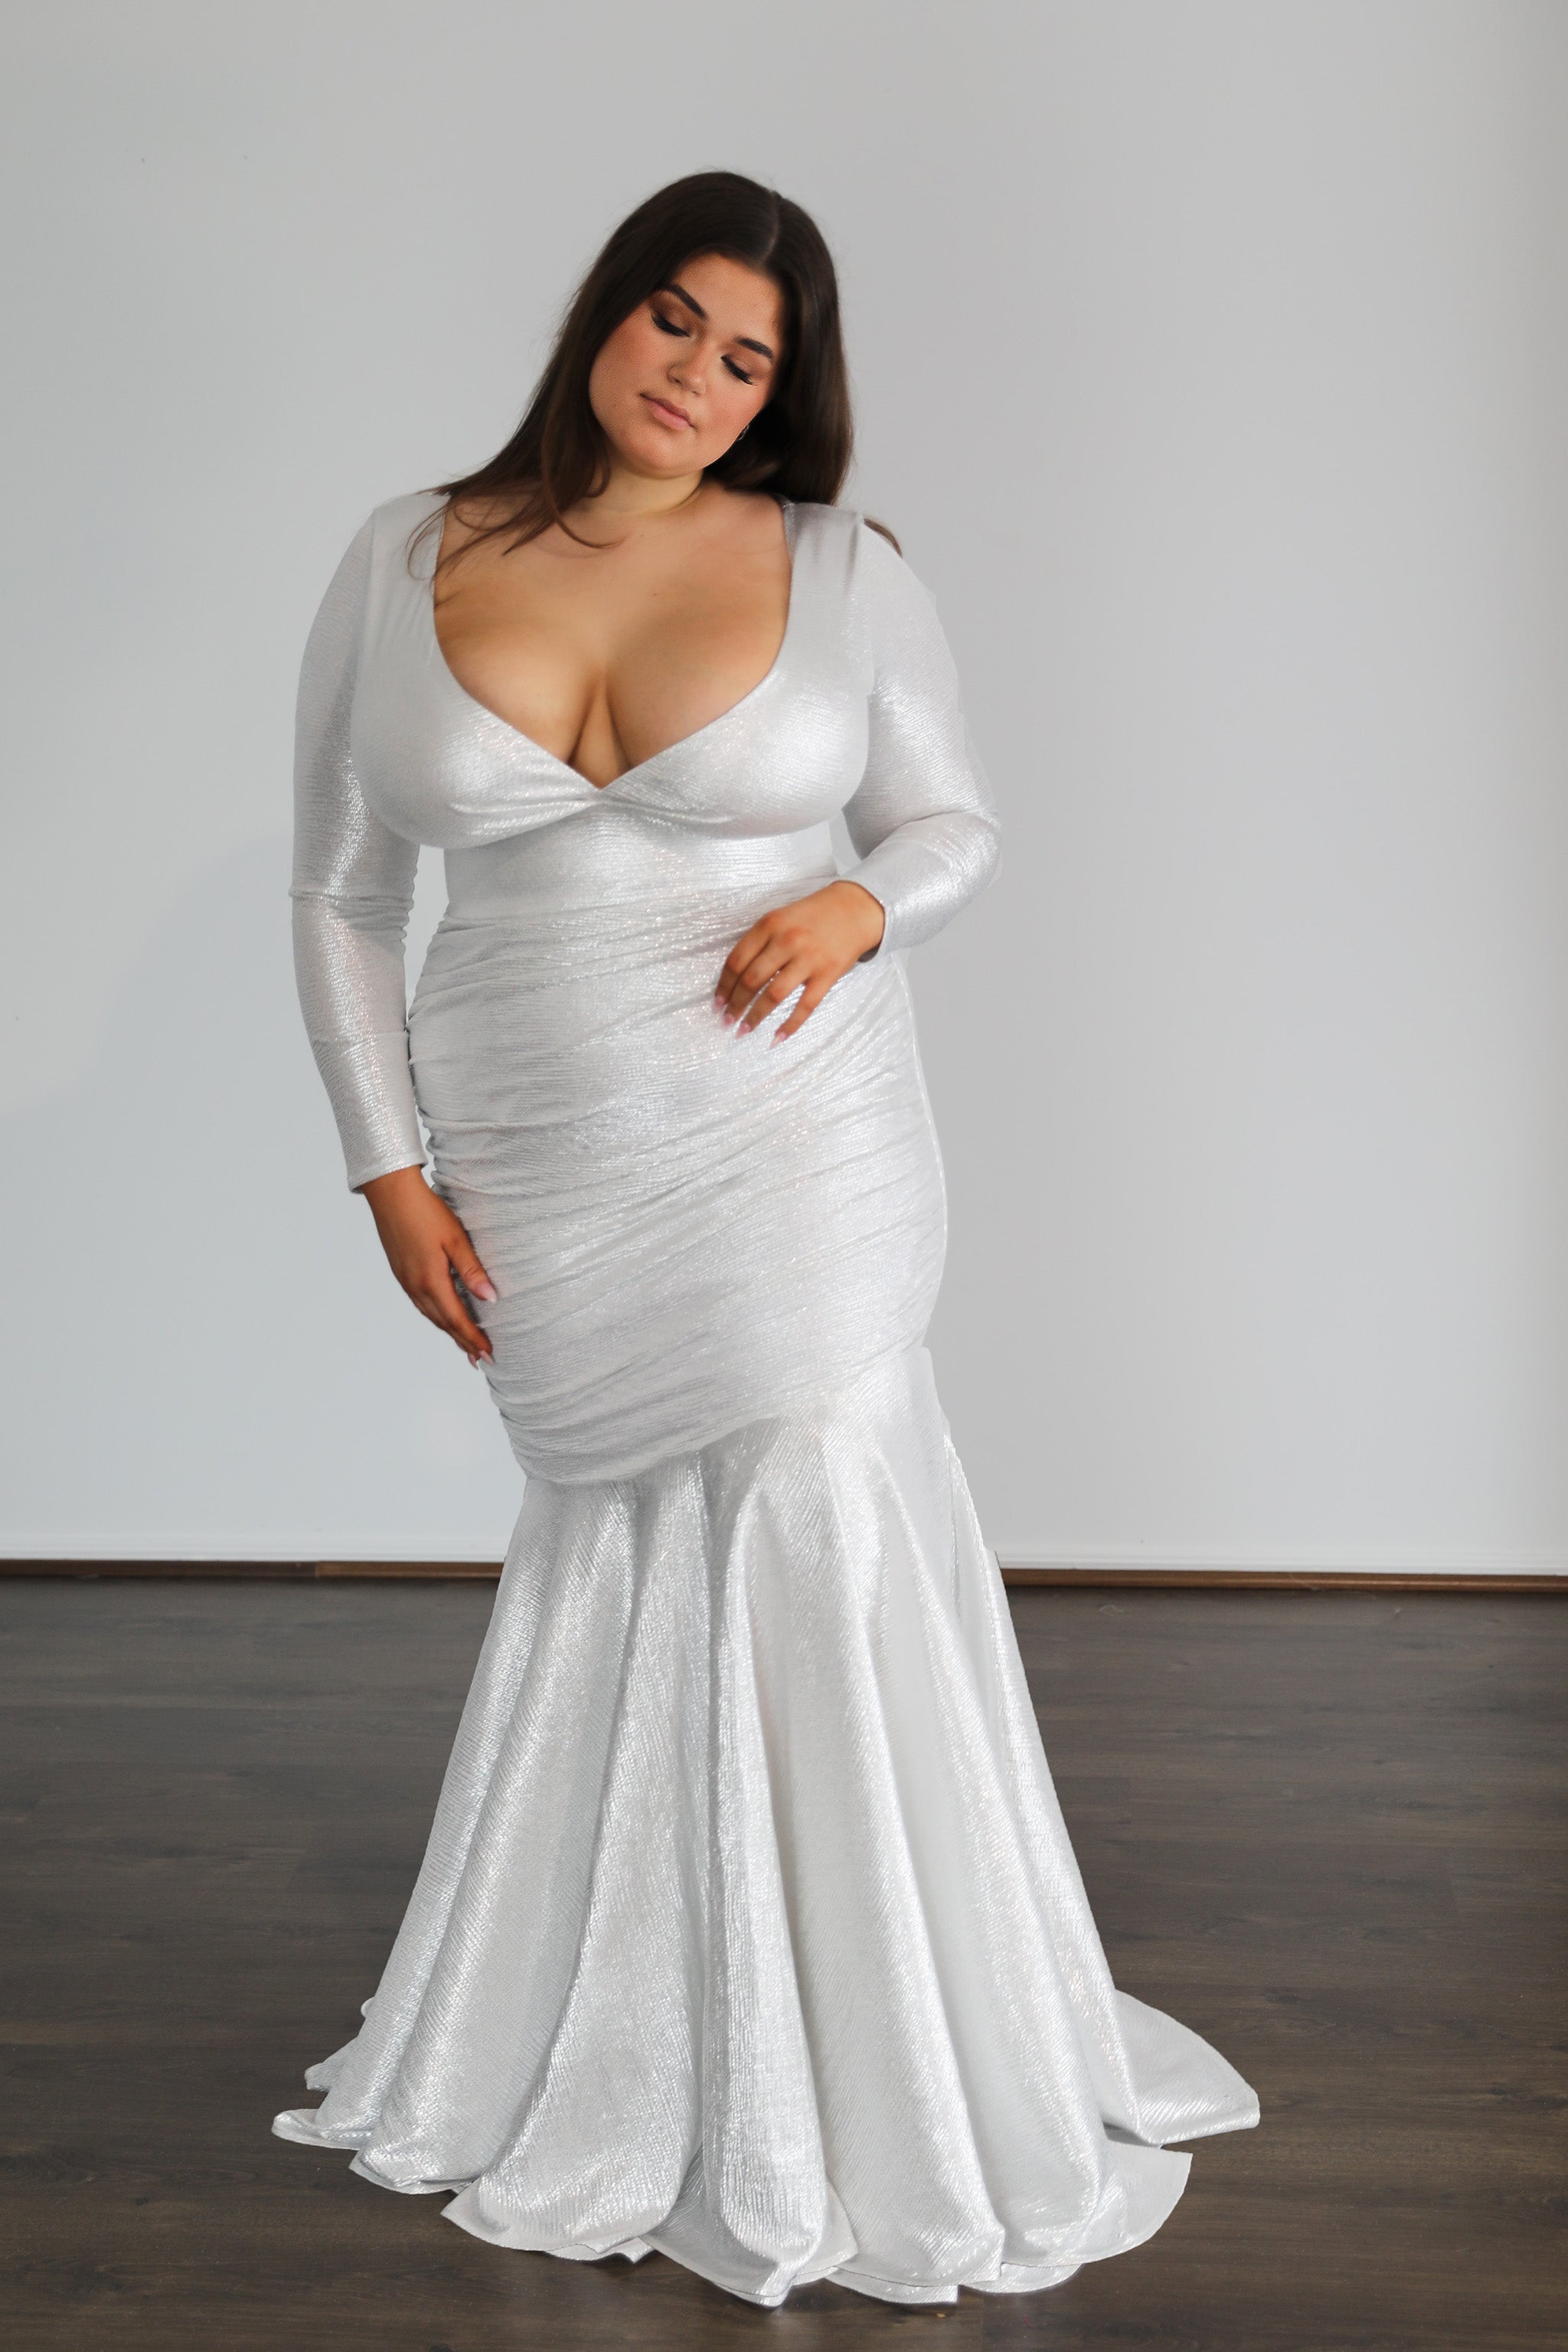 silver formal gown with long sleeves and low cut top